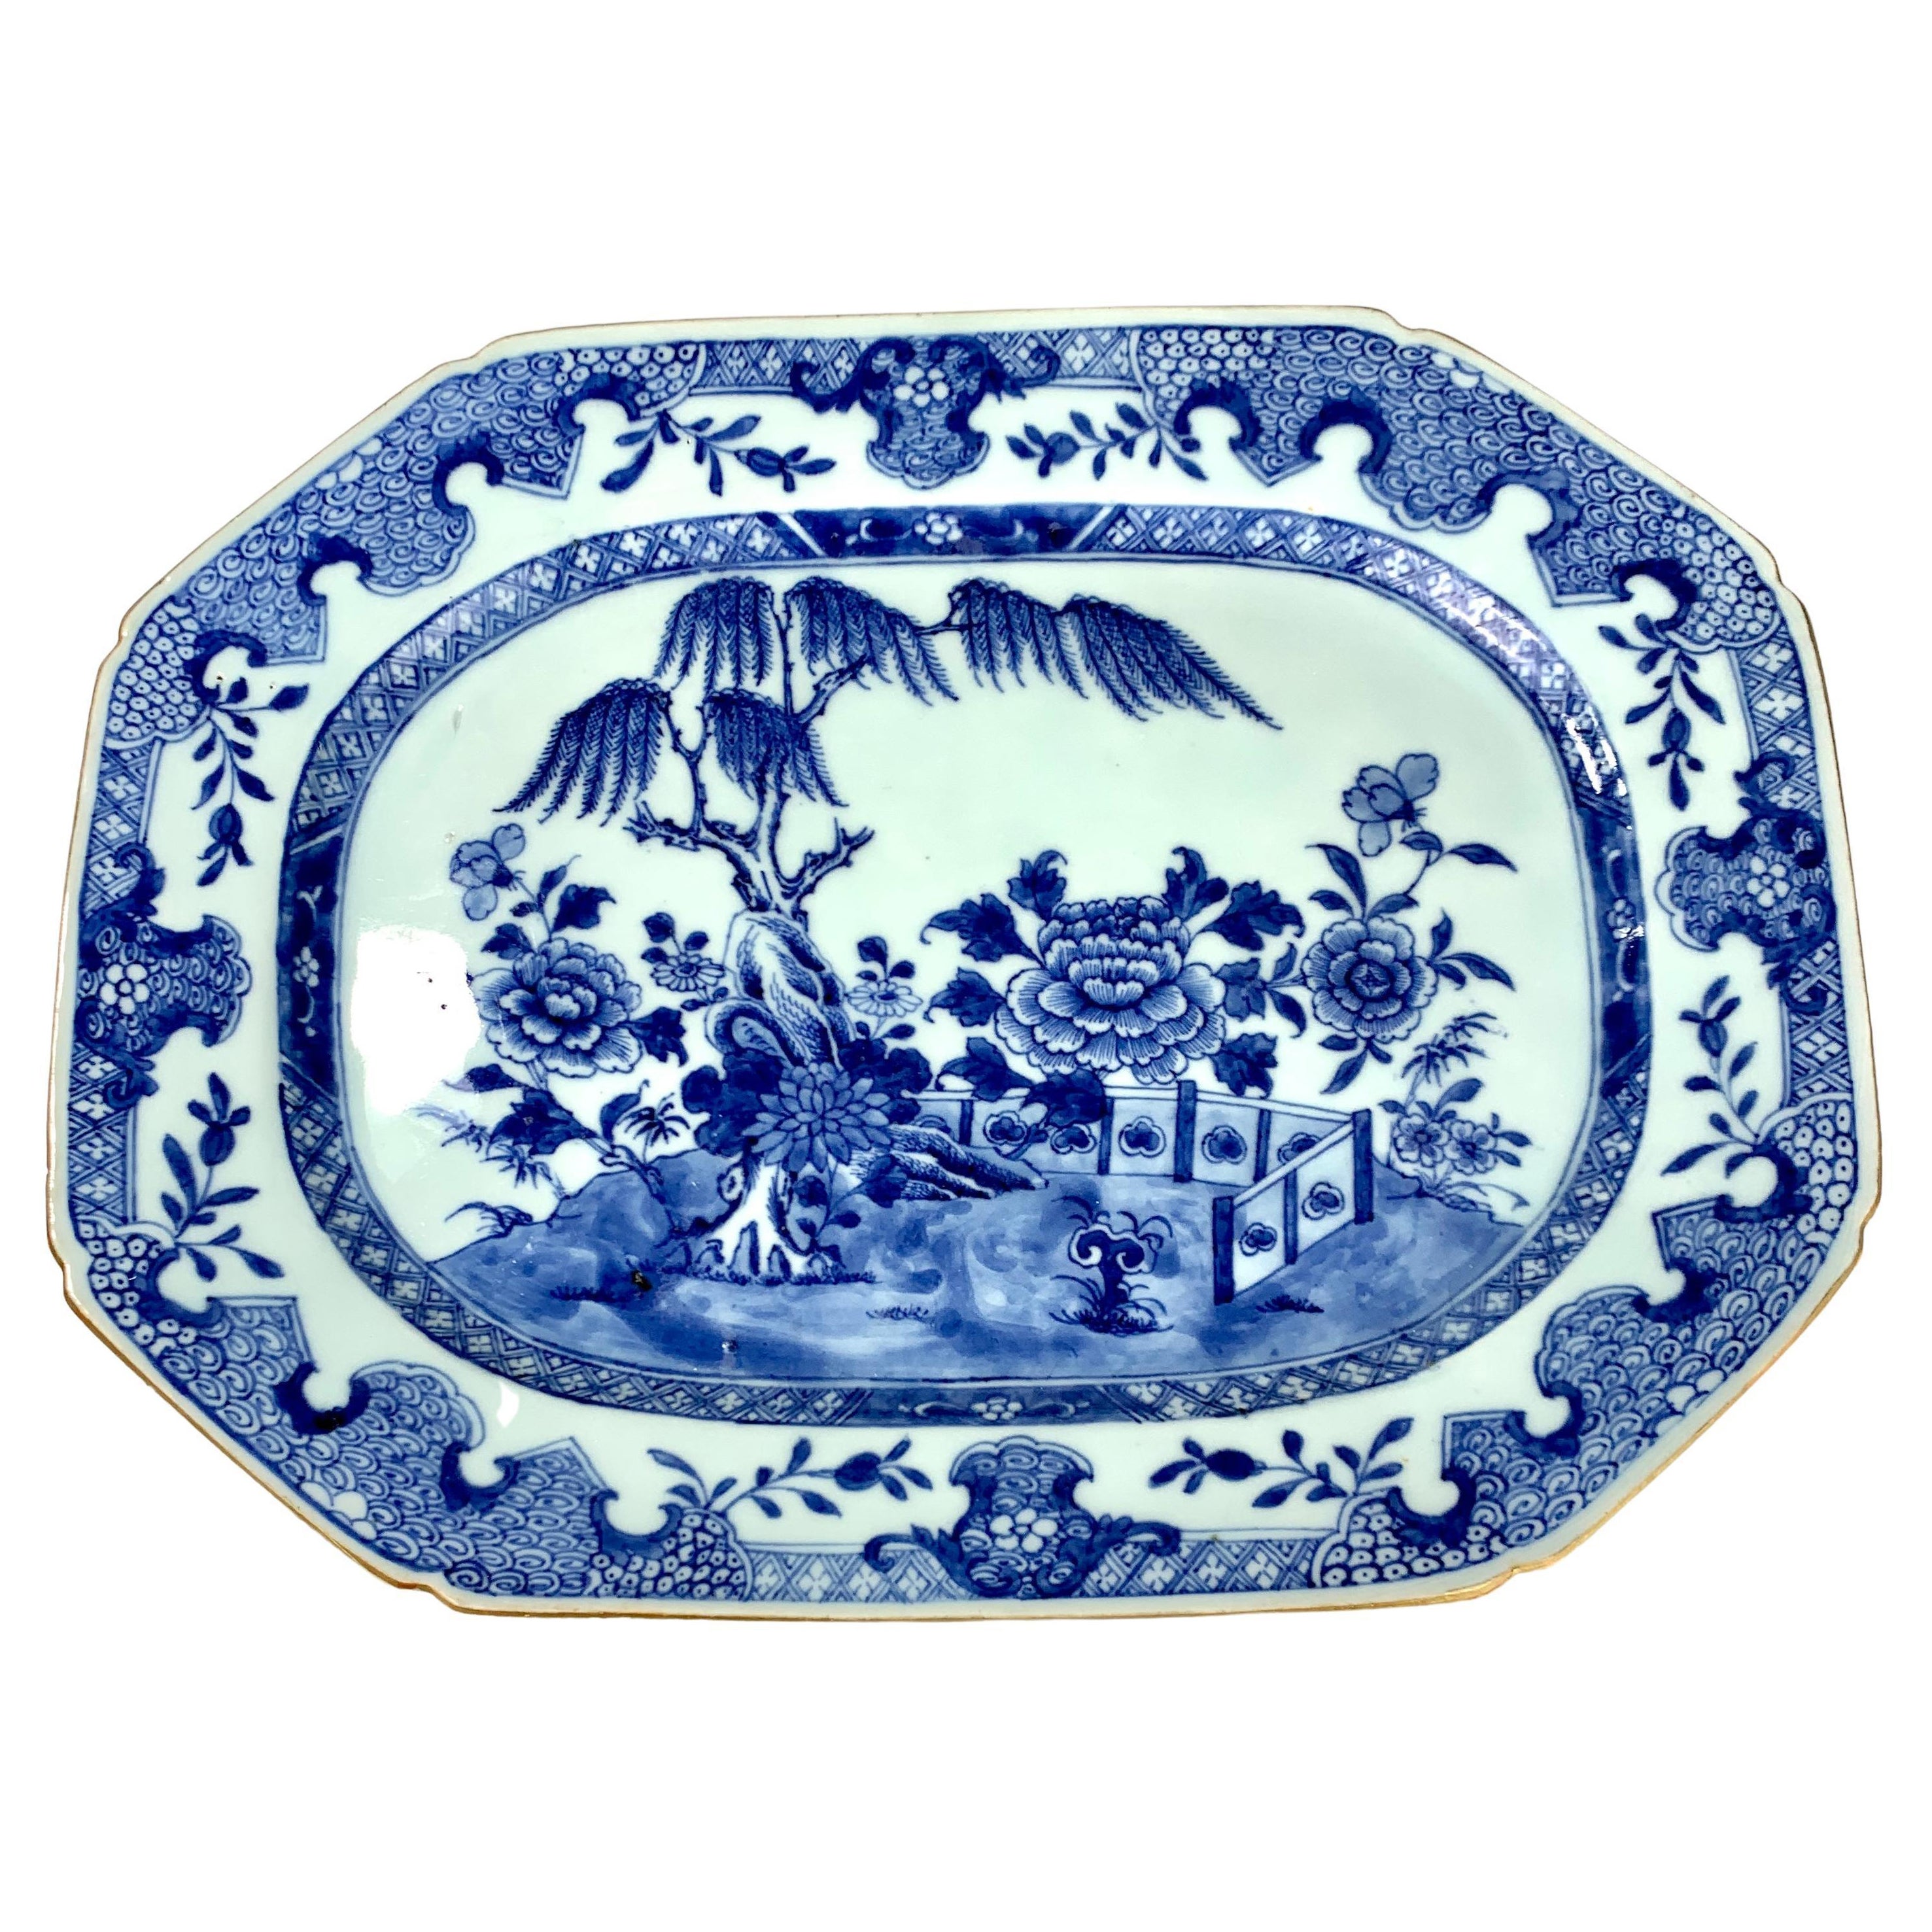 Chinese Blue and White Porcelain Platter Hand-Painted, 18th Century, Circa 1770